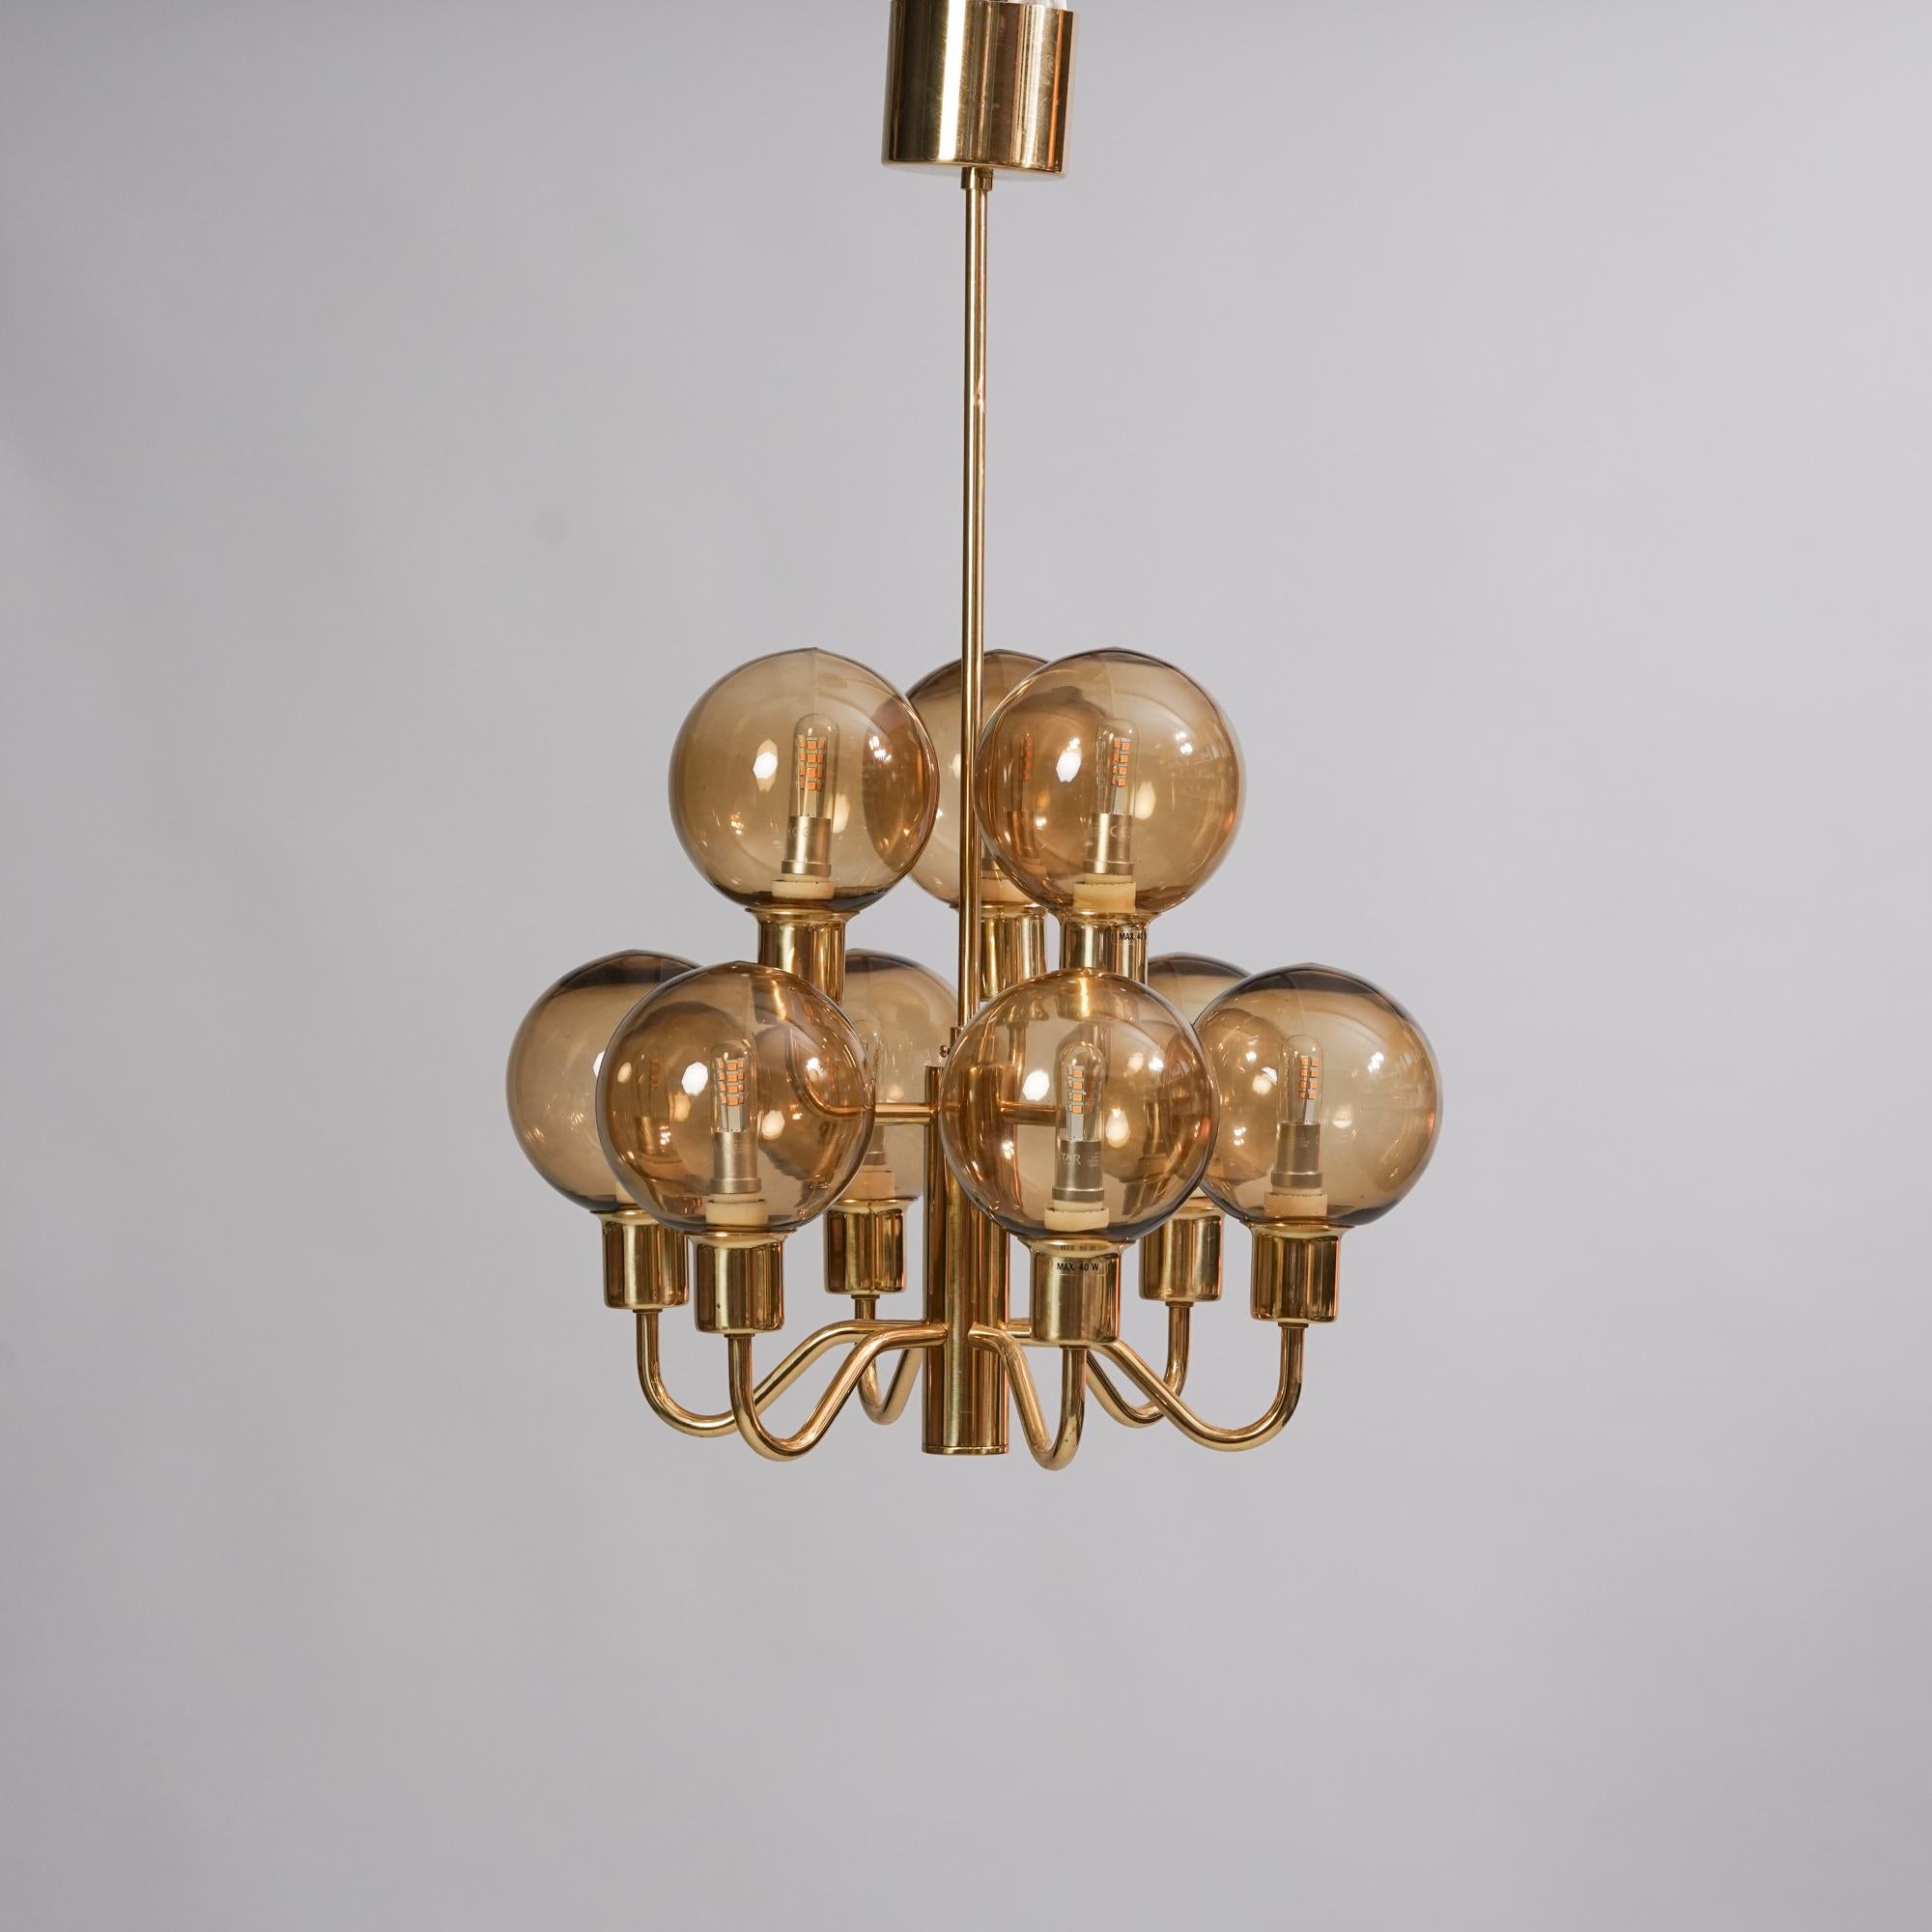 Pendant model T-716 designed by Hans-Agne Jacobsson for Markaryd from the Late 20th Century. Brass with glass shades. Good vintage condition, minor patina consistent with age and use.

Hans-Agne Jakobsson (1919-2009) was a Swedish furniture and